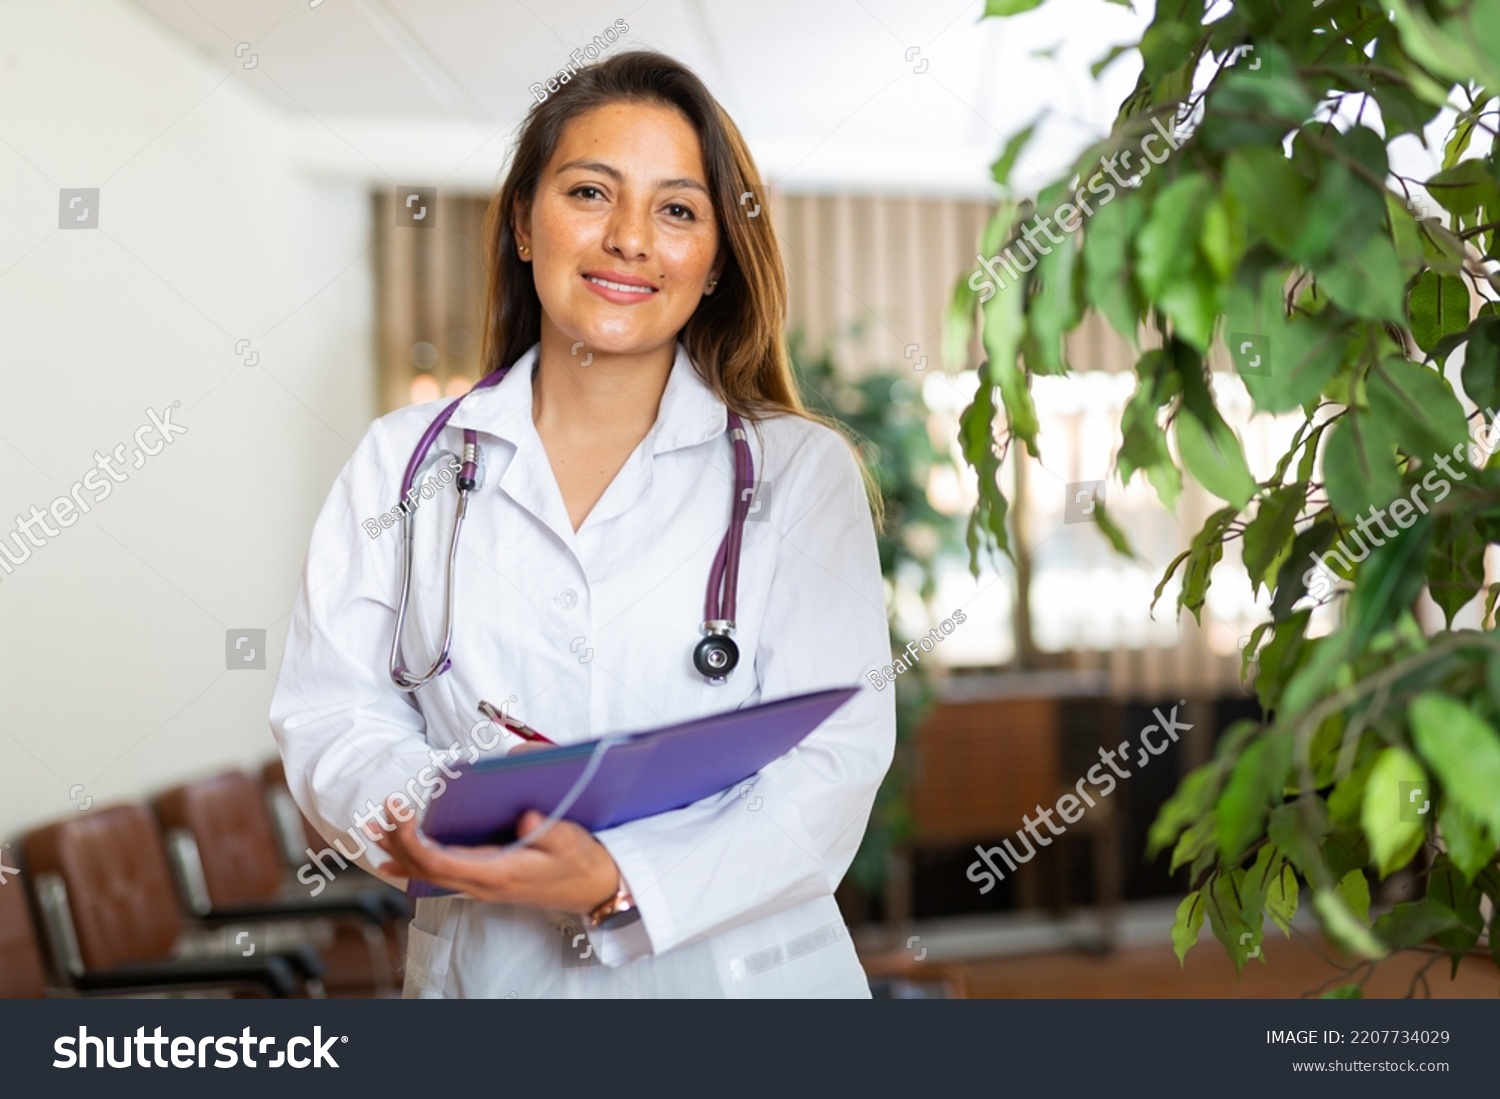 Portrait of young latin american female doctor wearing white coat standing in clinic office, filling out medical form at clipboard. #2207734029